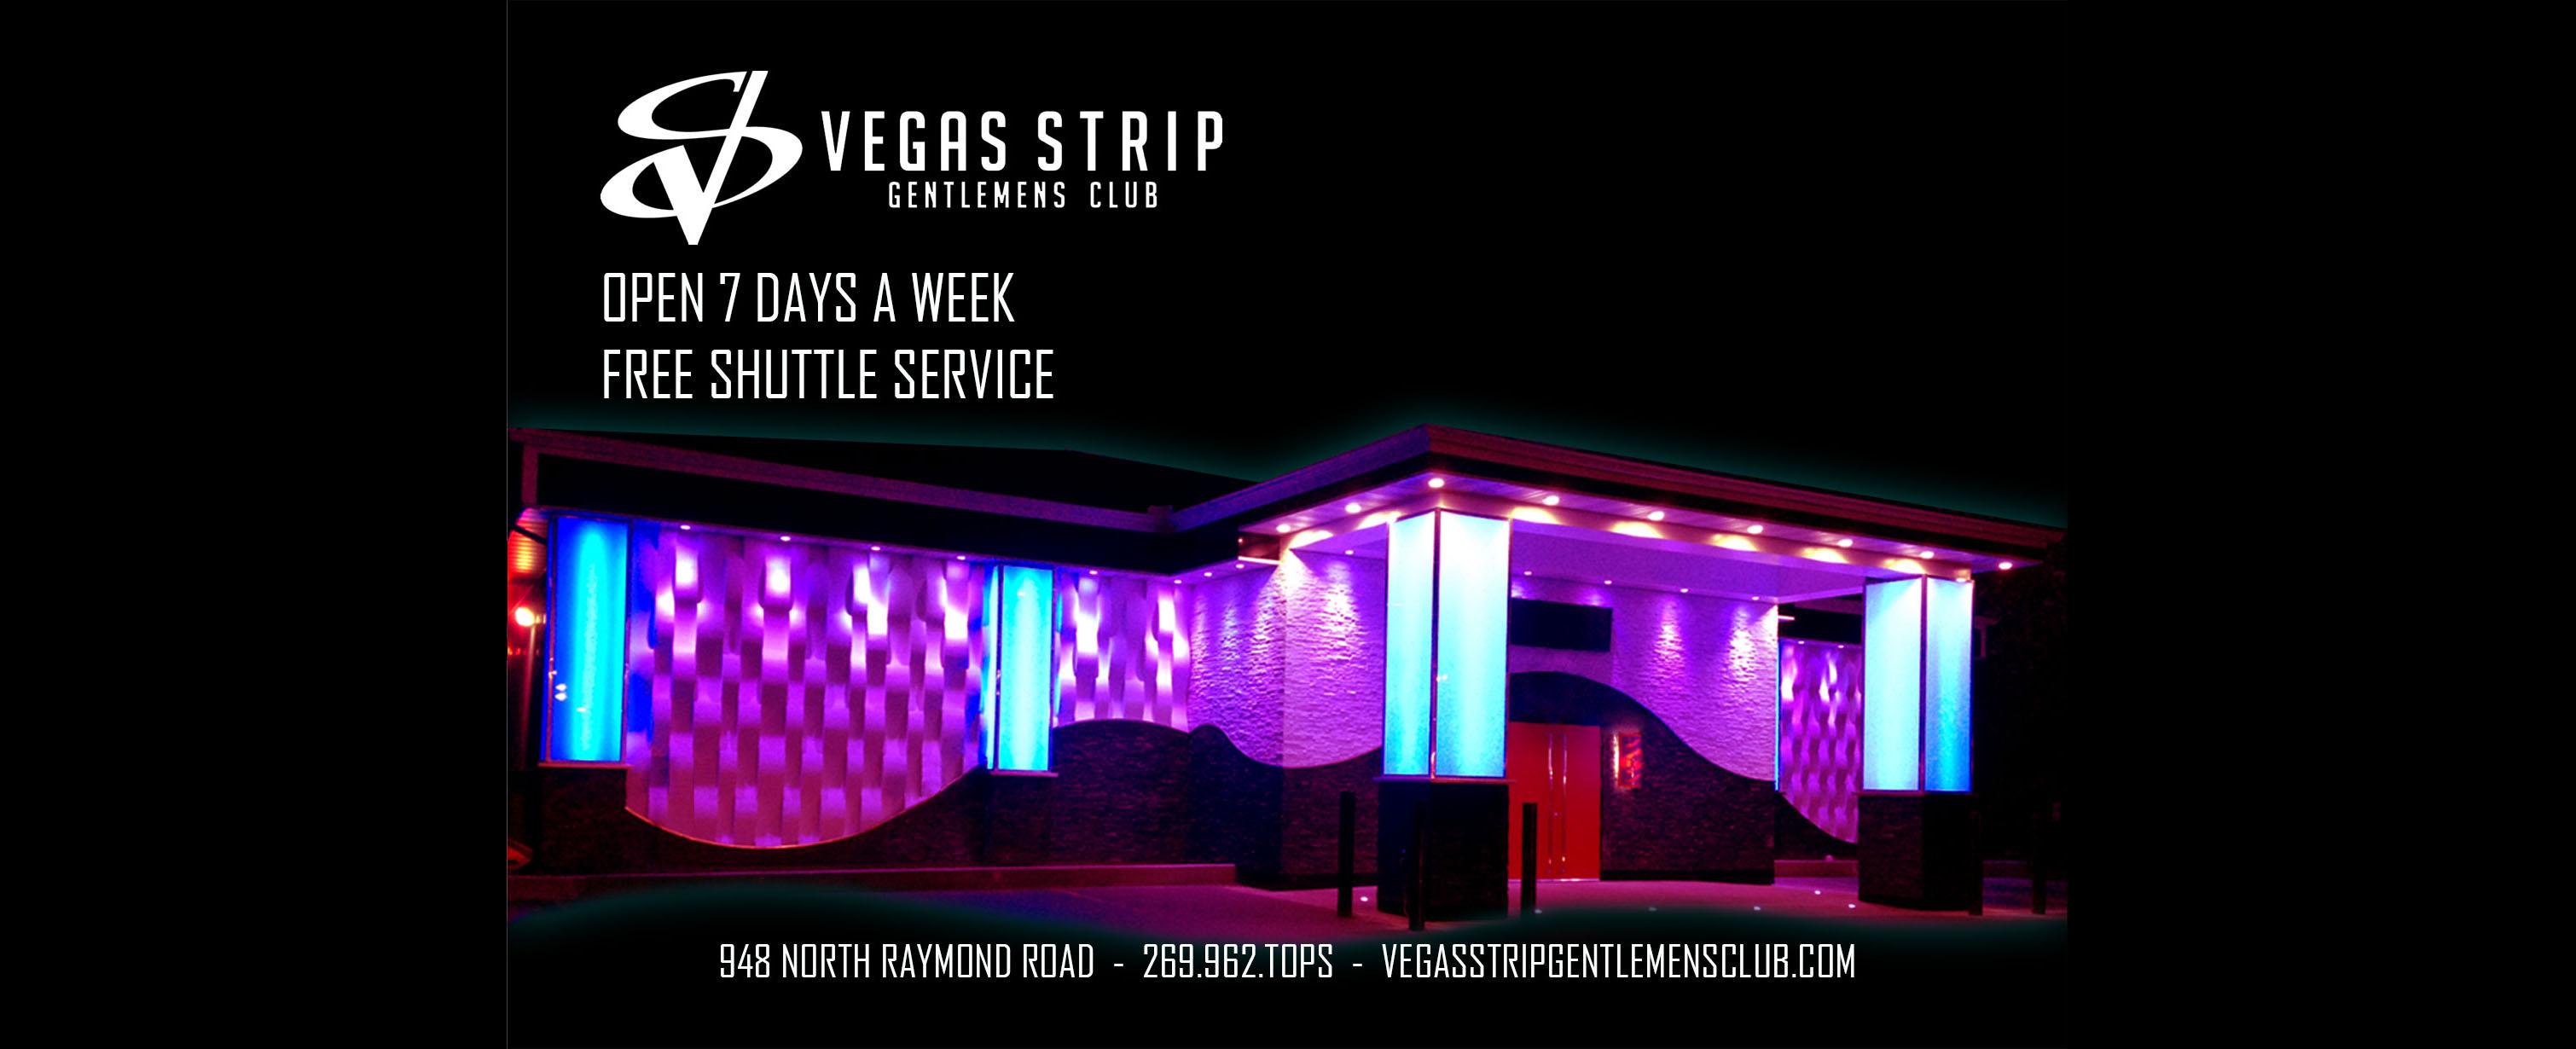 Your Ces Strip Club Guide